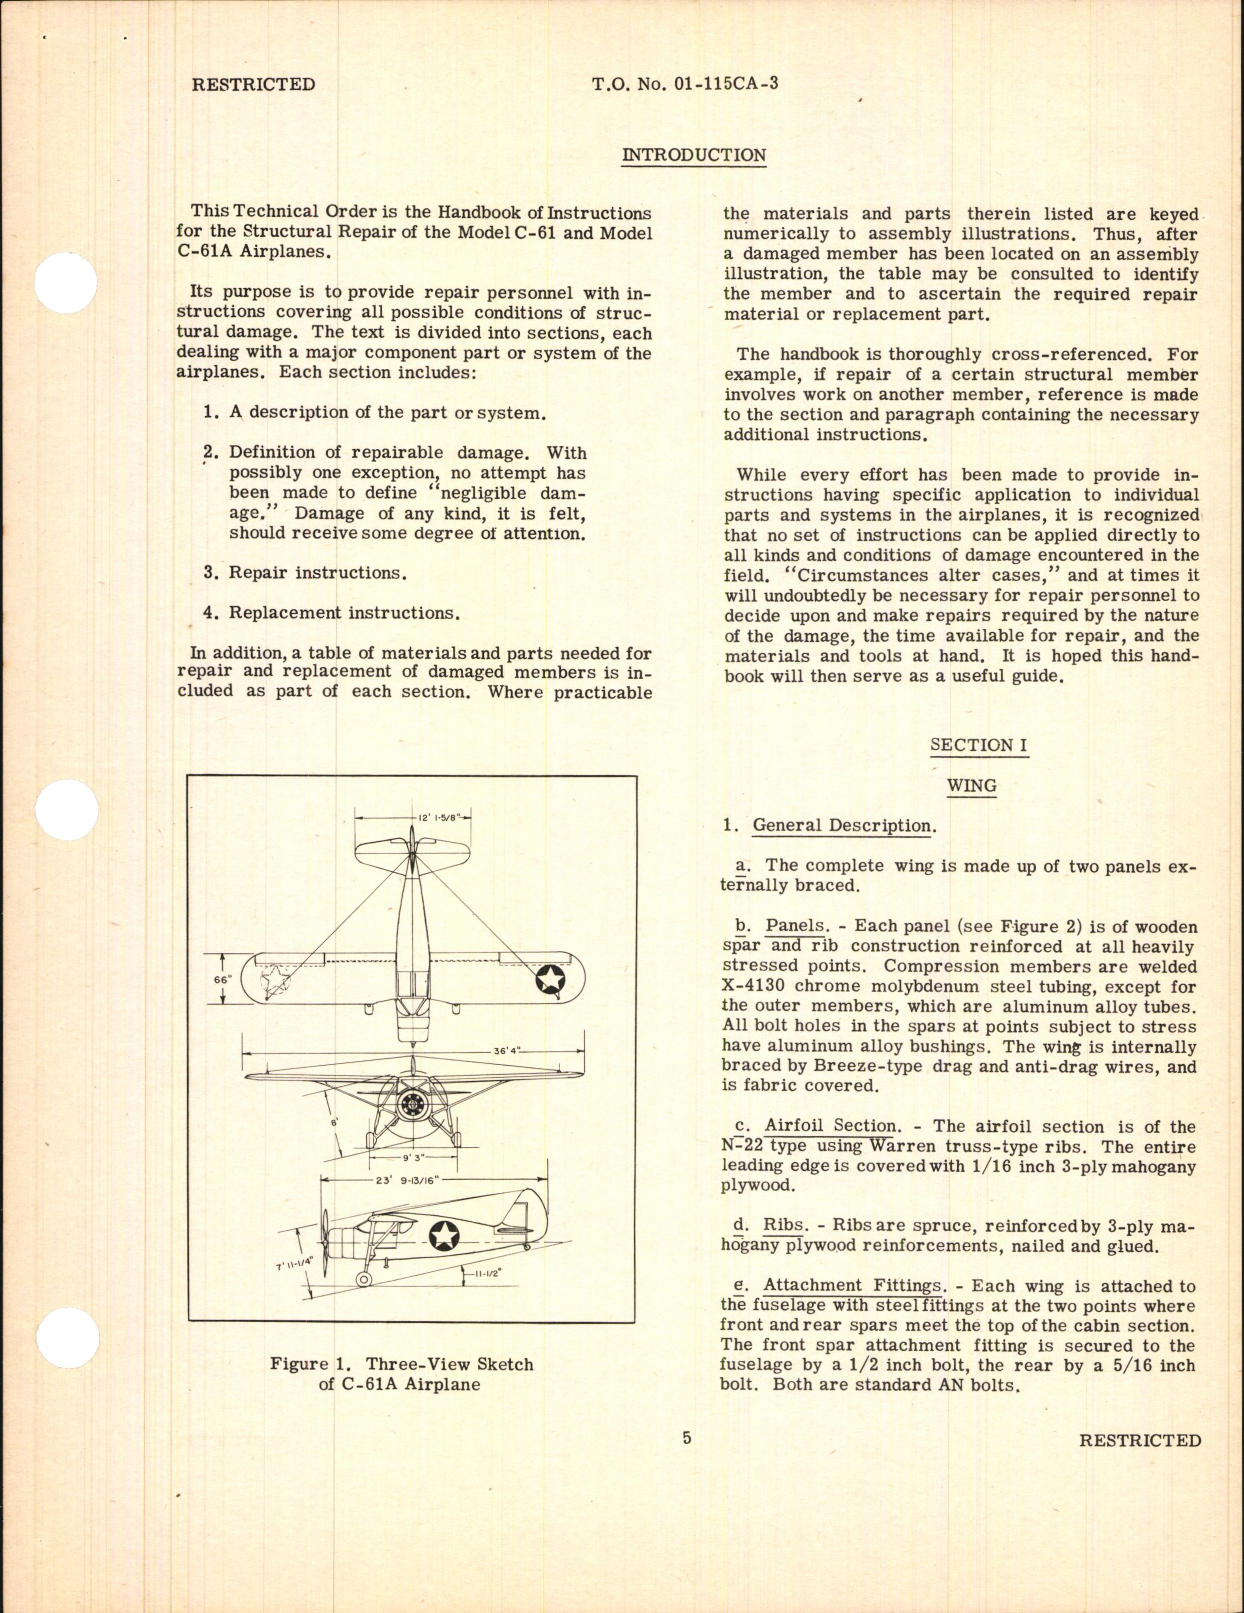 Sample page 7 from AirCorps Library document: Handbook of Instructions for the Structural Repair of the C-61 Series Transport Airplanes